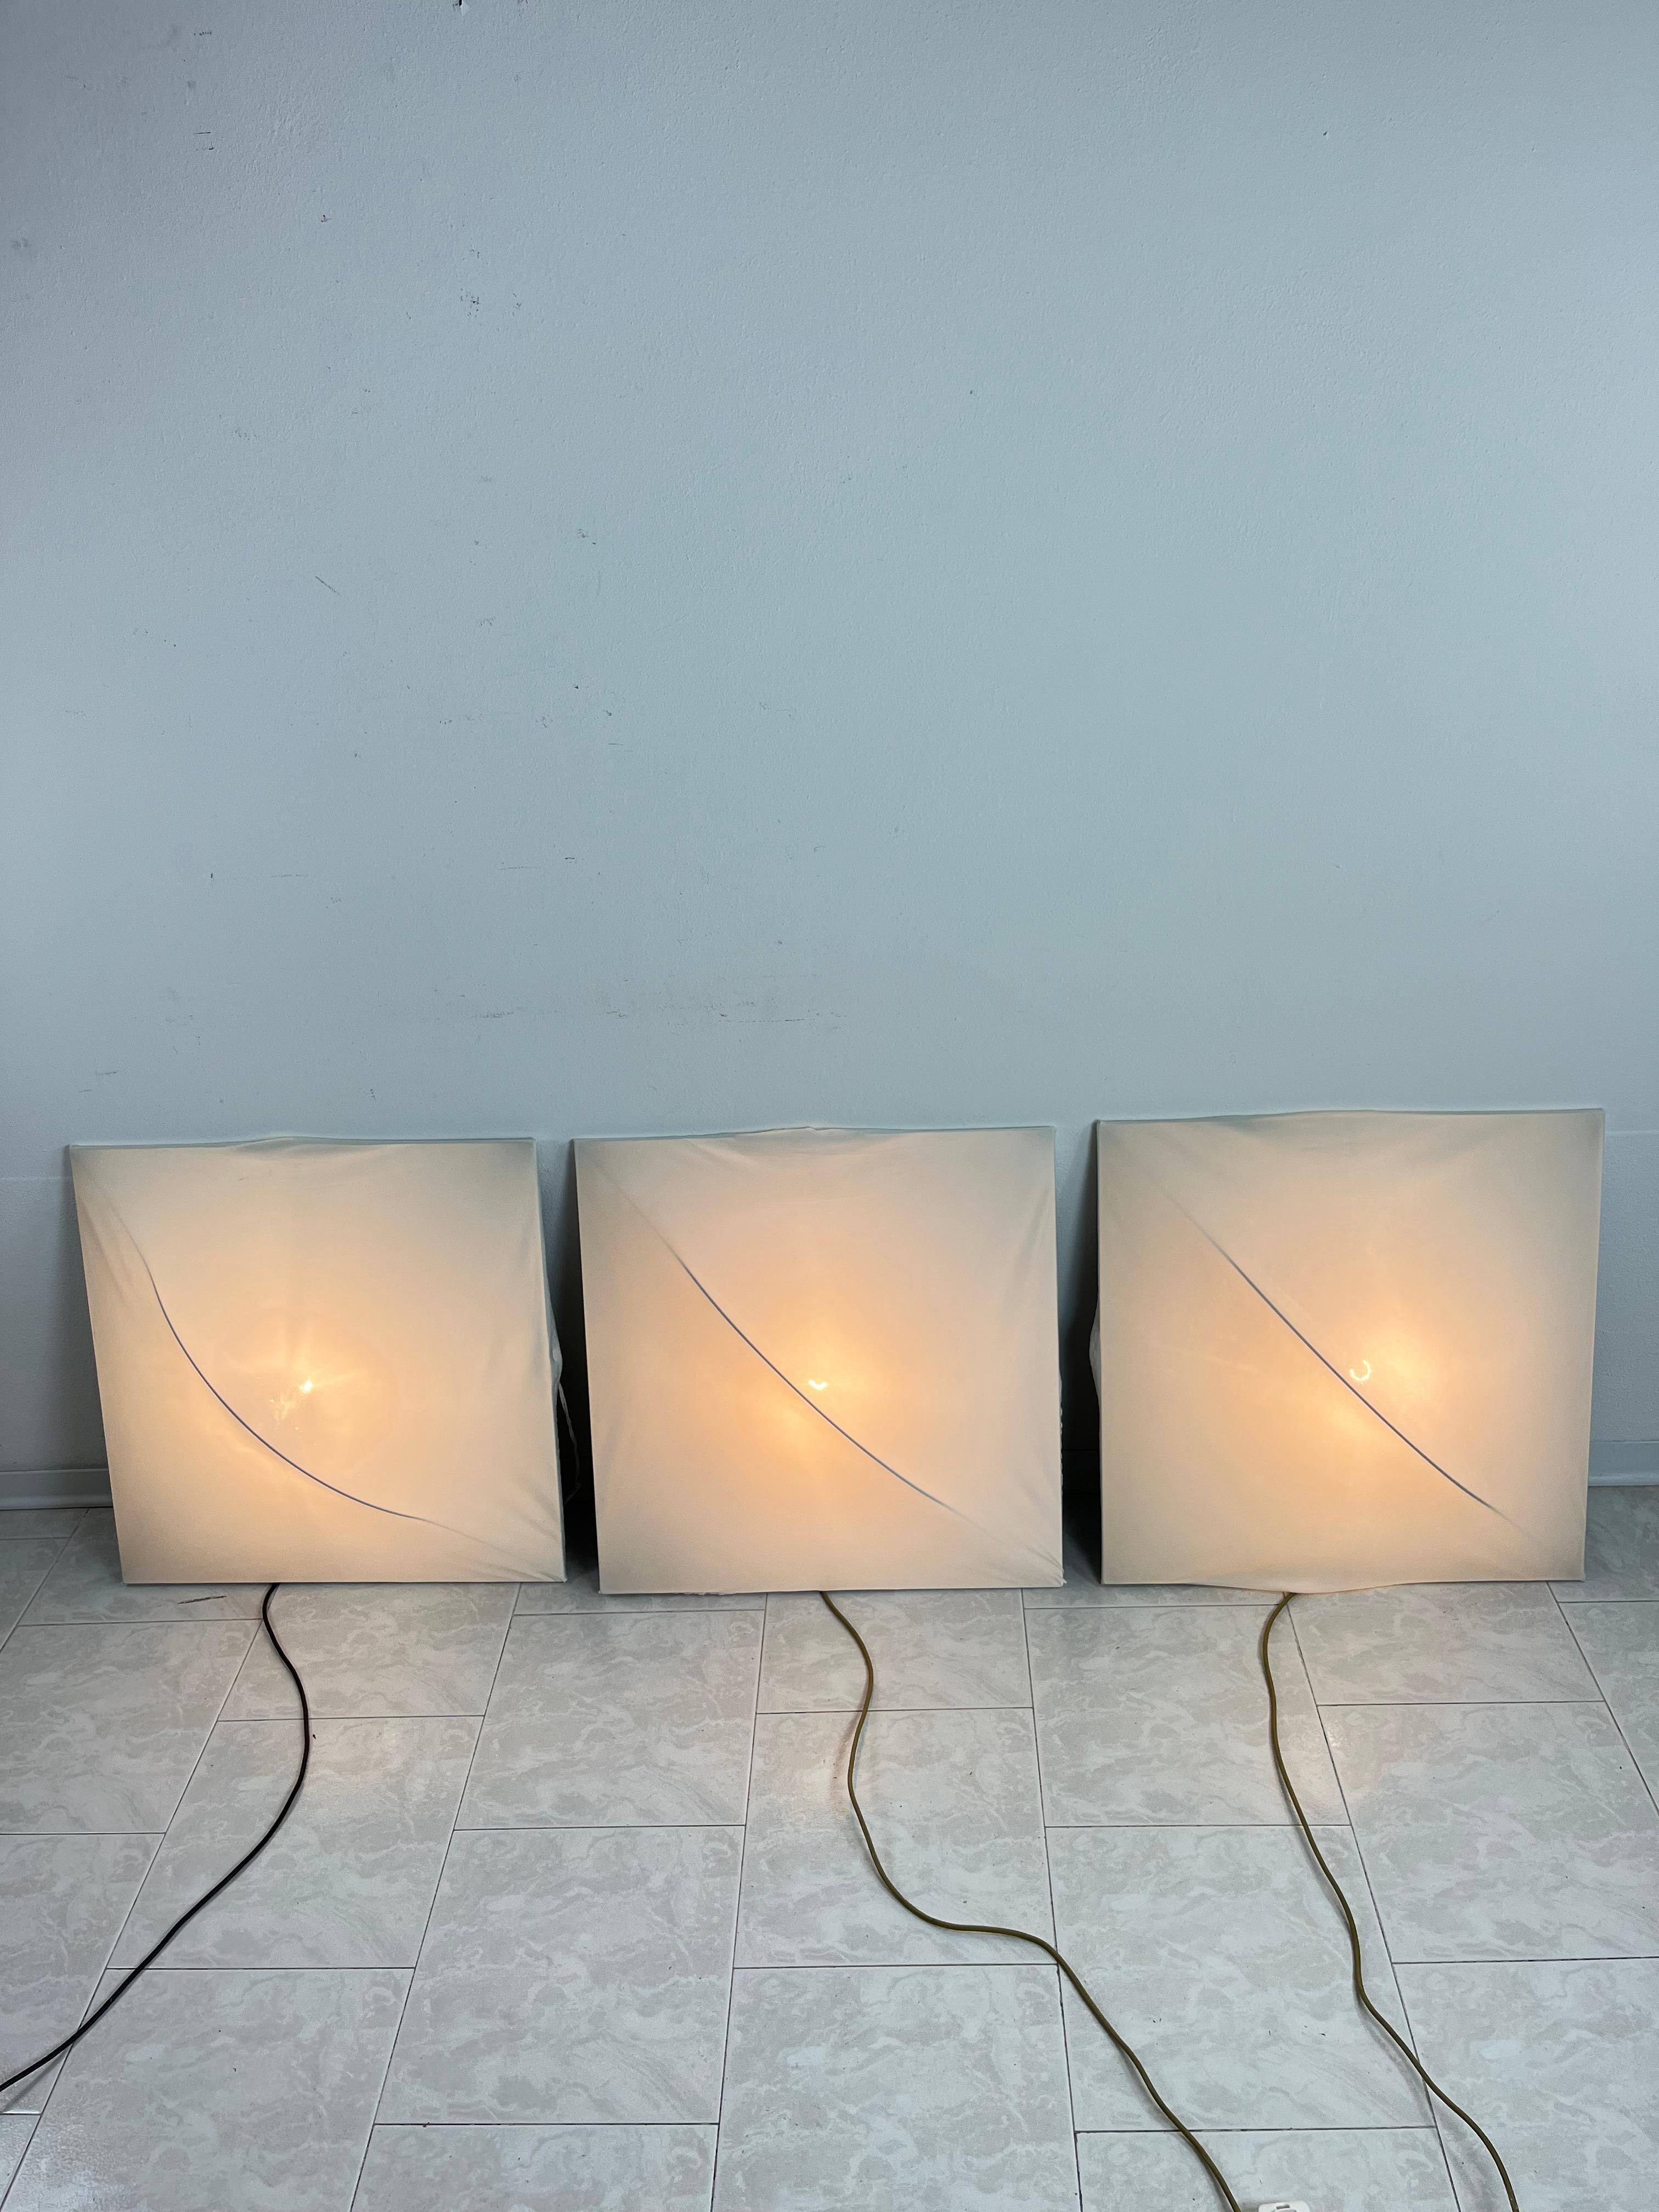 Set of 3 chandeliers
 Saori wall lamps by Kazuhide Takahama for Sirrah, 1970s
Metal structure and fabric covering. One of the covers has small holes.
Good general condition.

We guarantee adequate packaging and will ship via DHL, insuring the